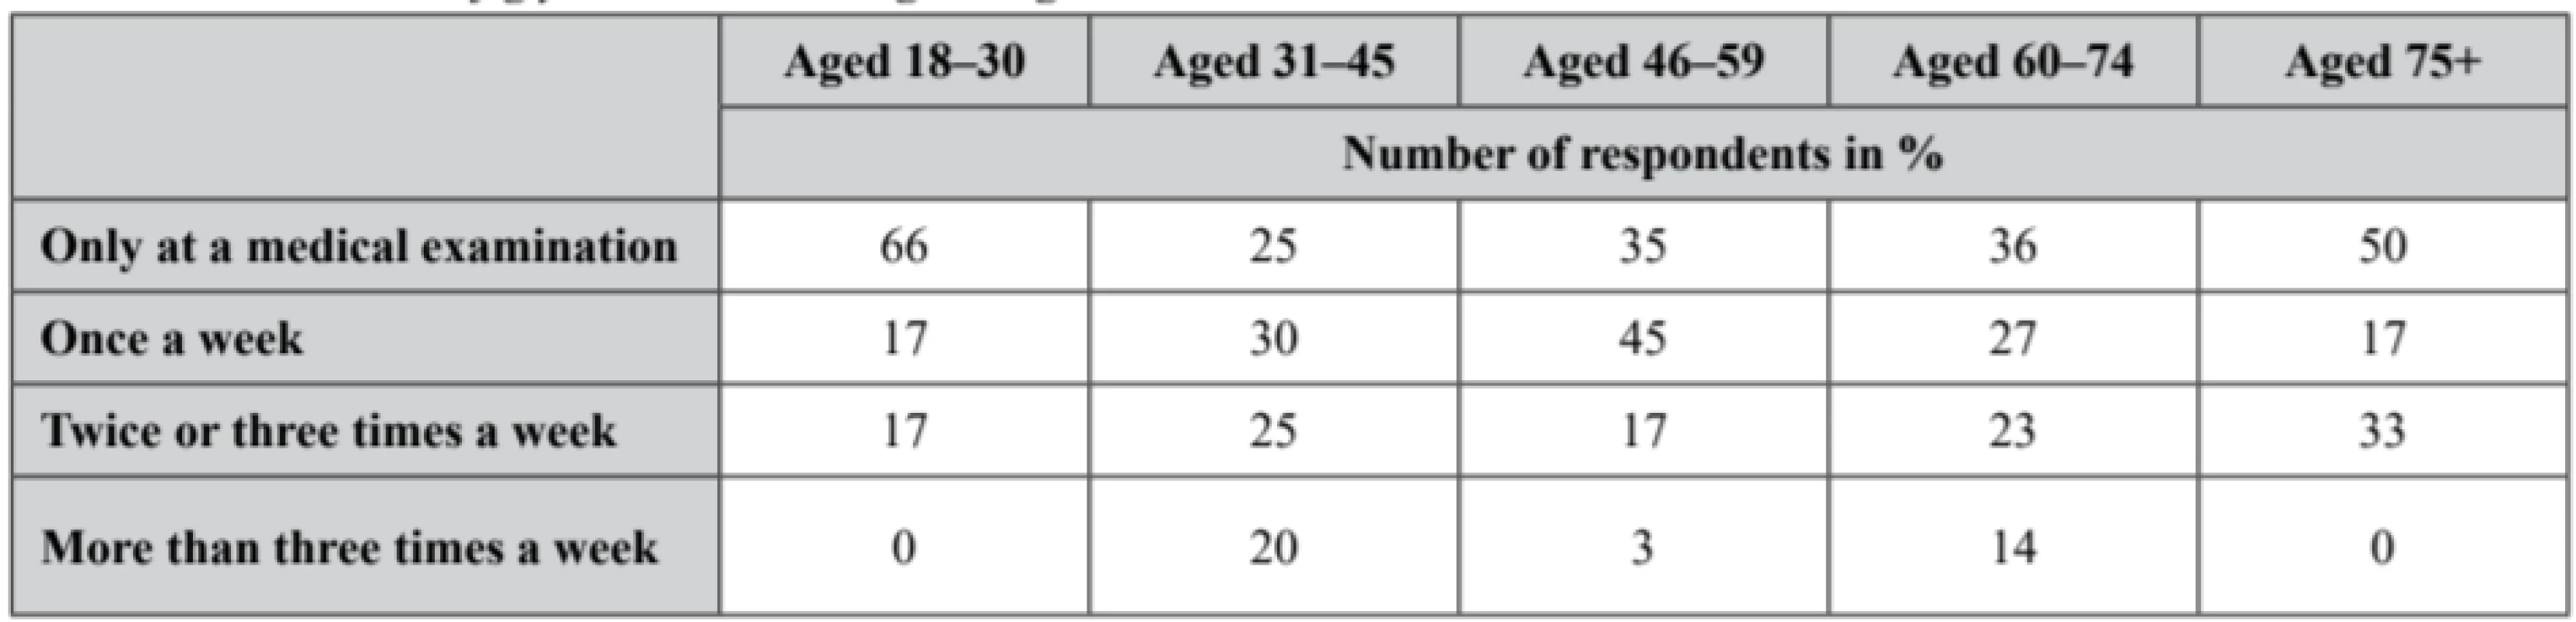 Measurement of glycaemia level in age categories